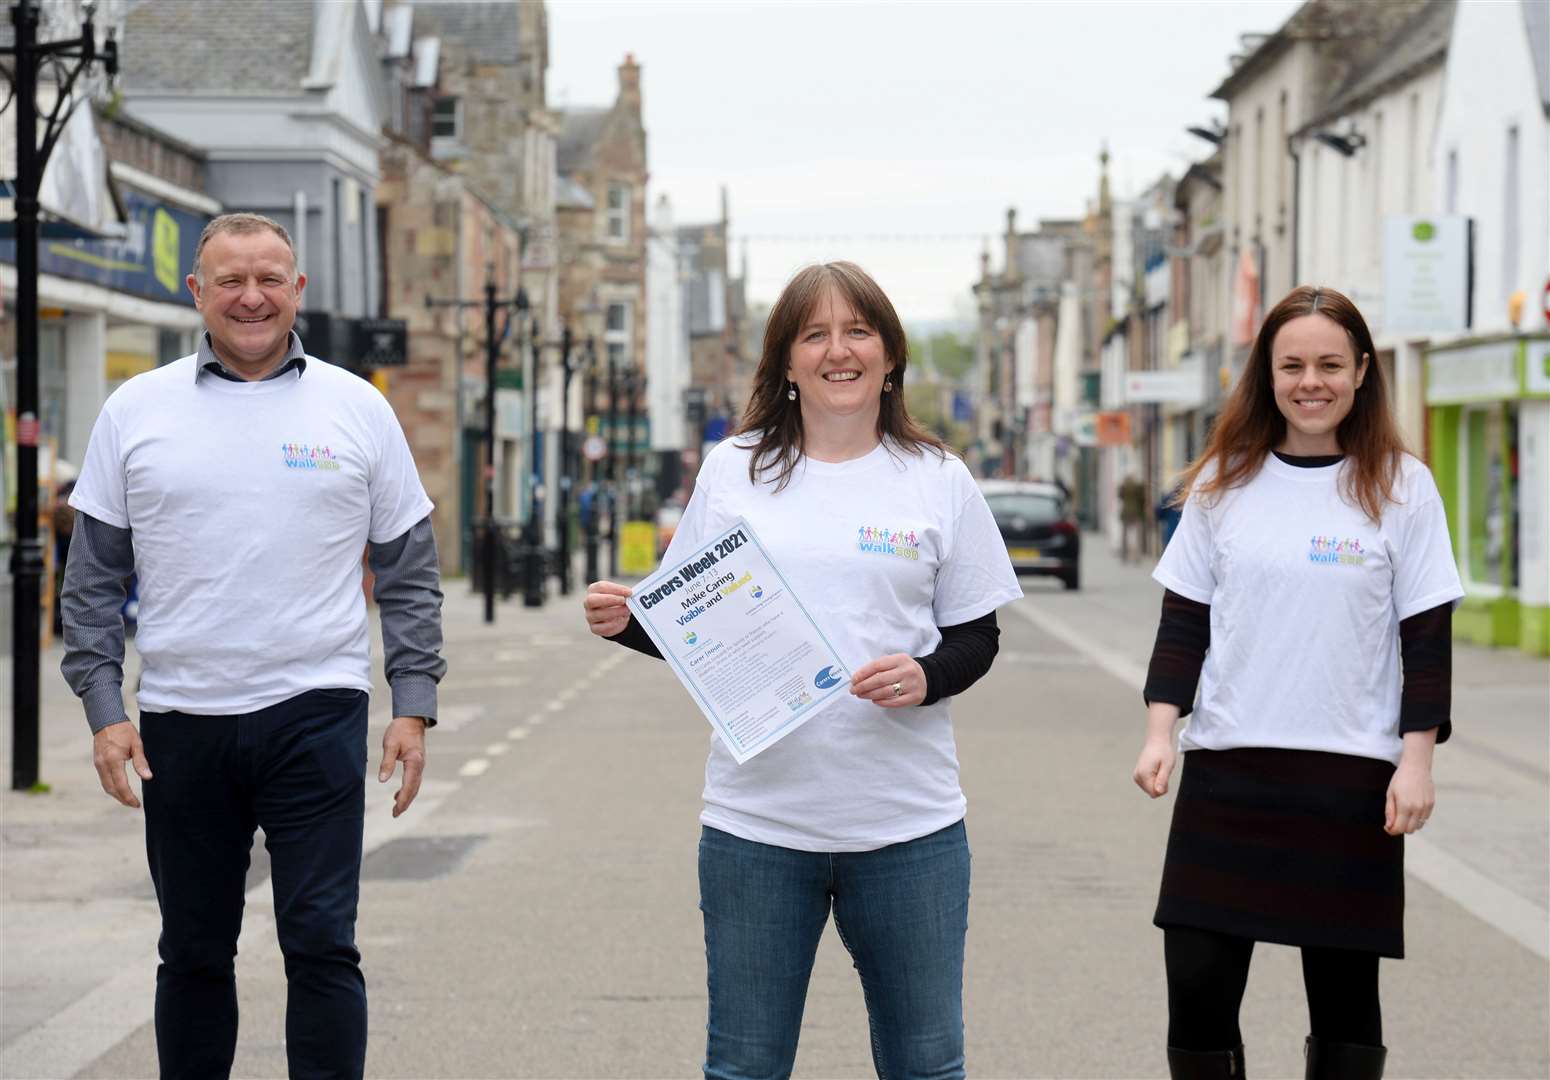 Highland SNP representatives Drew Hendry MP, Maree Todd MSP and Kate Forbes MSP have been united on many issues, including an earlier Carers Week Walk back in 2021. They differ, however, on Ms Forbes bid to become the next First Minister. Picture: Gary Anthony